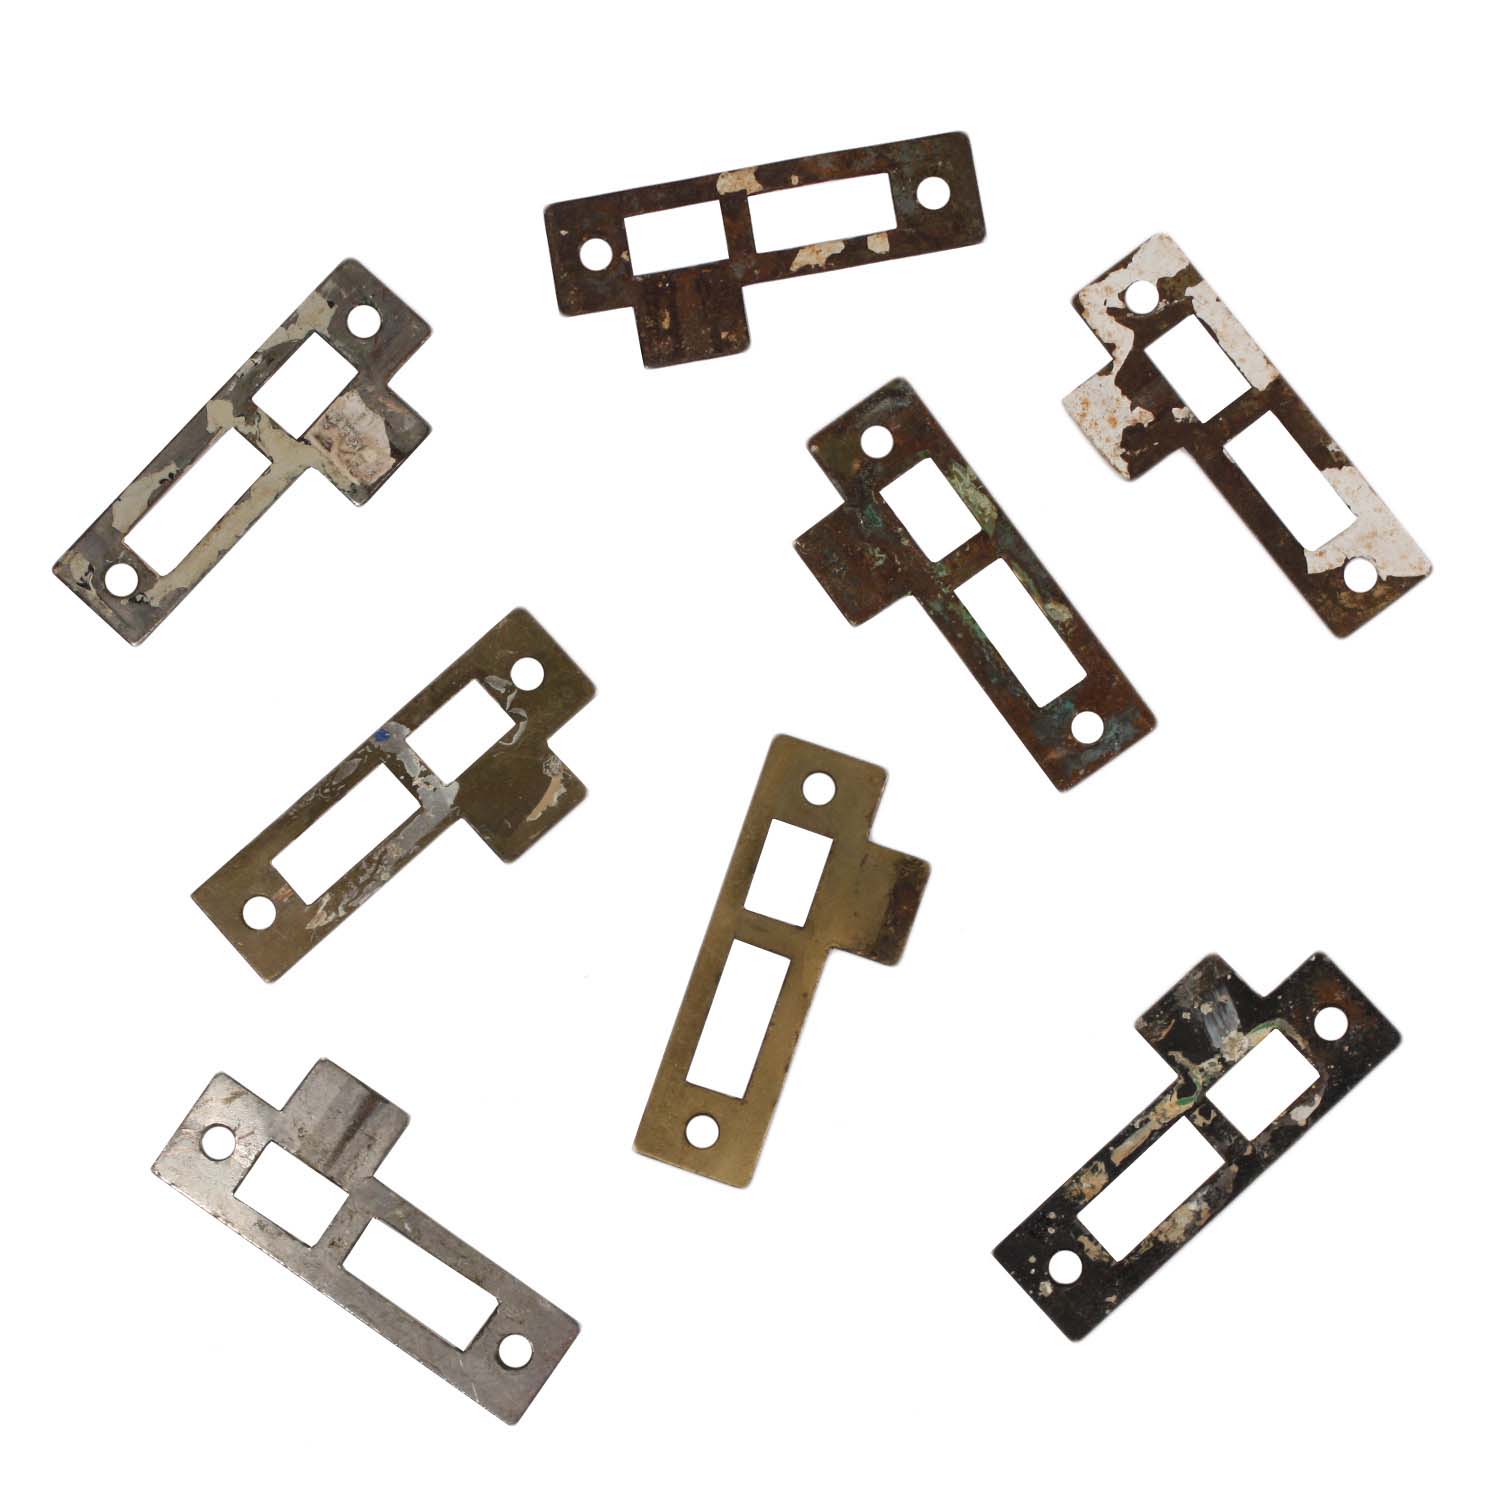 SOLD Antique Salvaged Strike Plates for Mortise Locks, 1/4” Spacing-41355